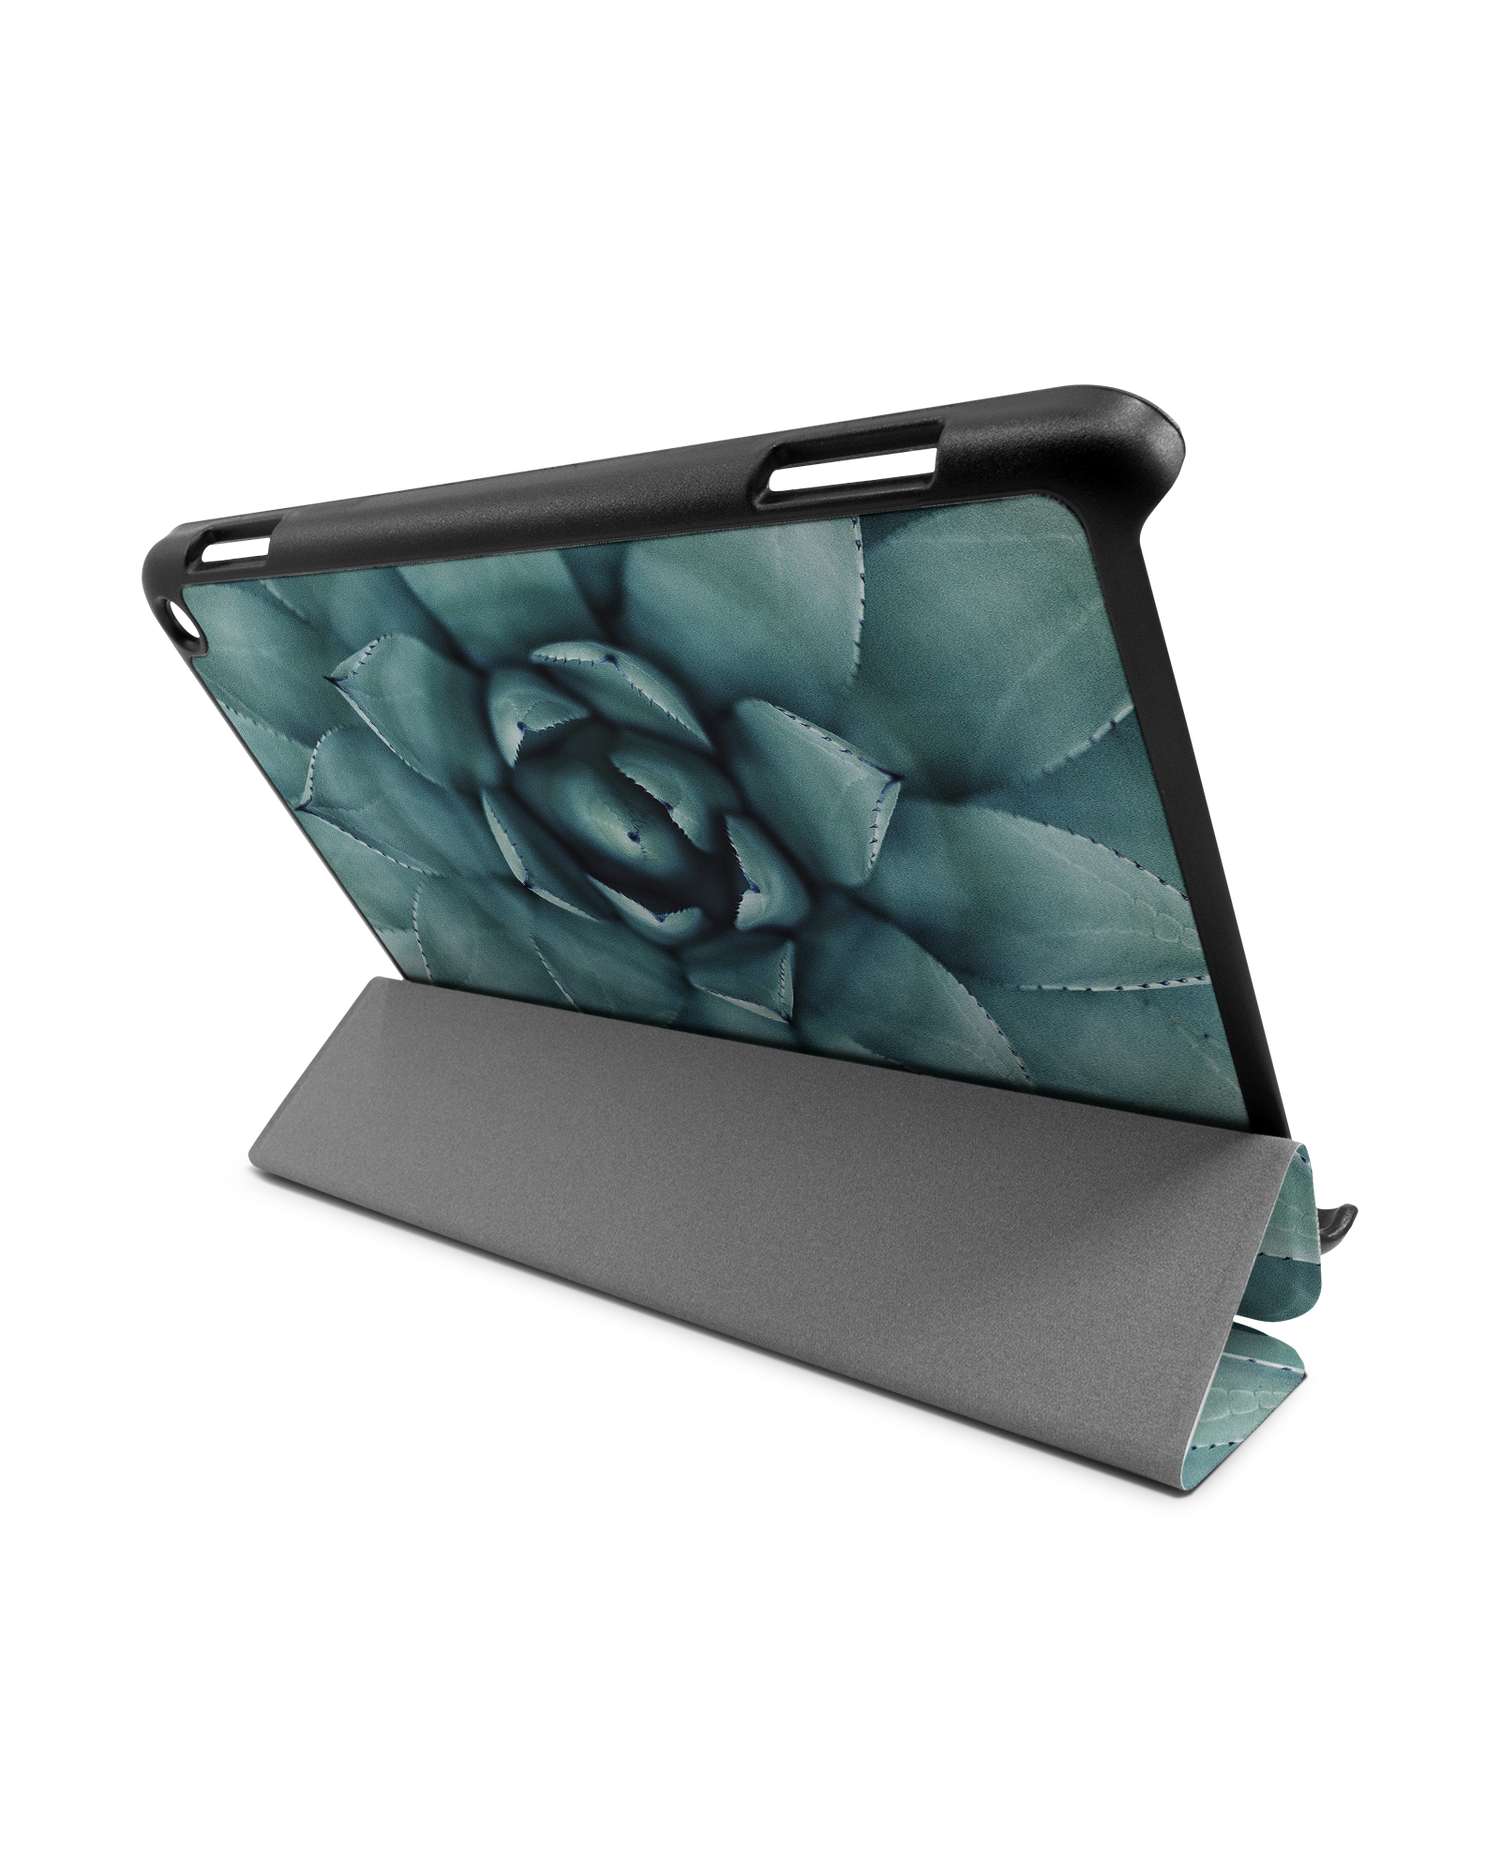 Beautiful Succulent Tablet Smart Case for Amazon Fire HD 8 (2022), Amazon Fire HD 8 Plus (2022), Amazon Fire HD 8 (2020), Amazon Fire HD 8 Plus (2020): Used as Stand